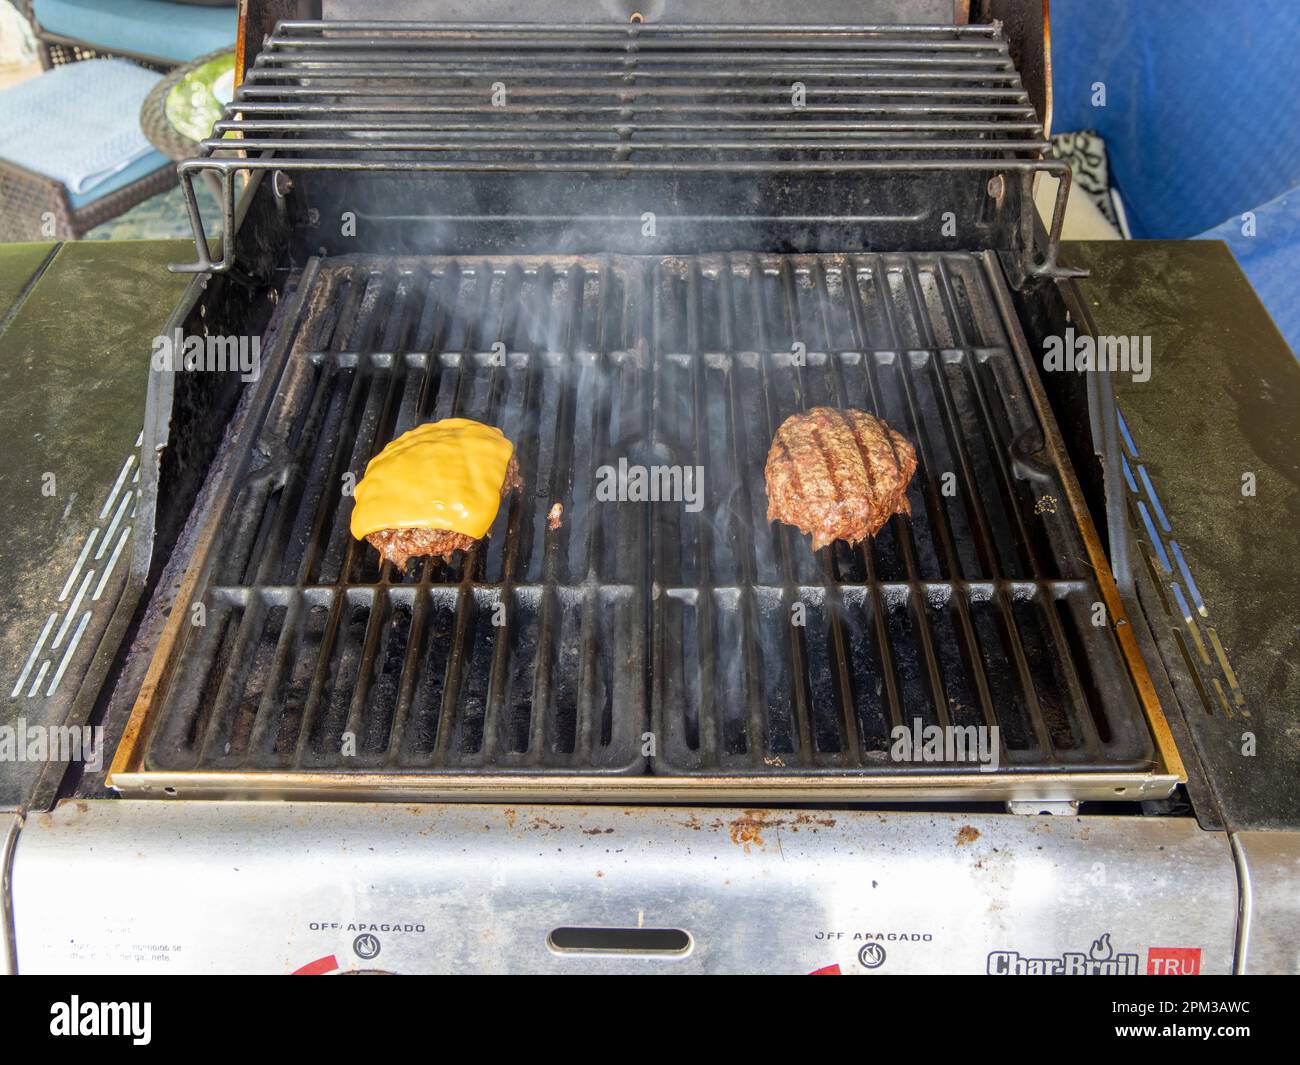 Hamburger and cheeseburger grilling on an outdoor gas grill in Montgomery Alabama, USA. Stock Photo